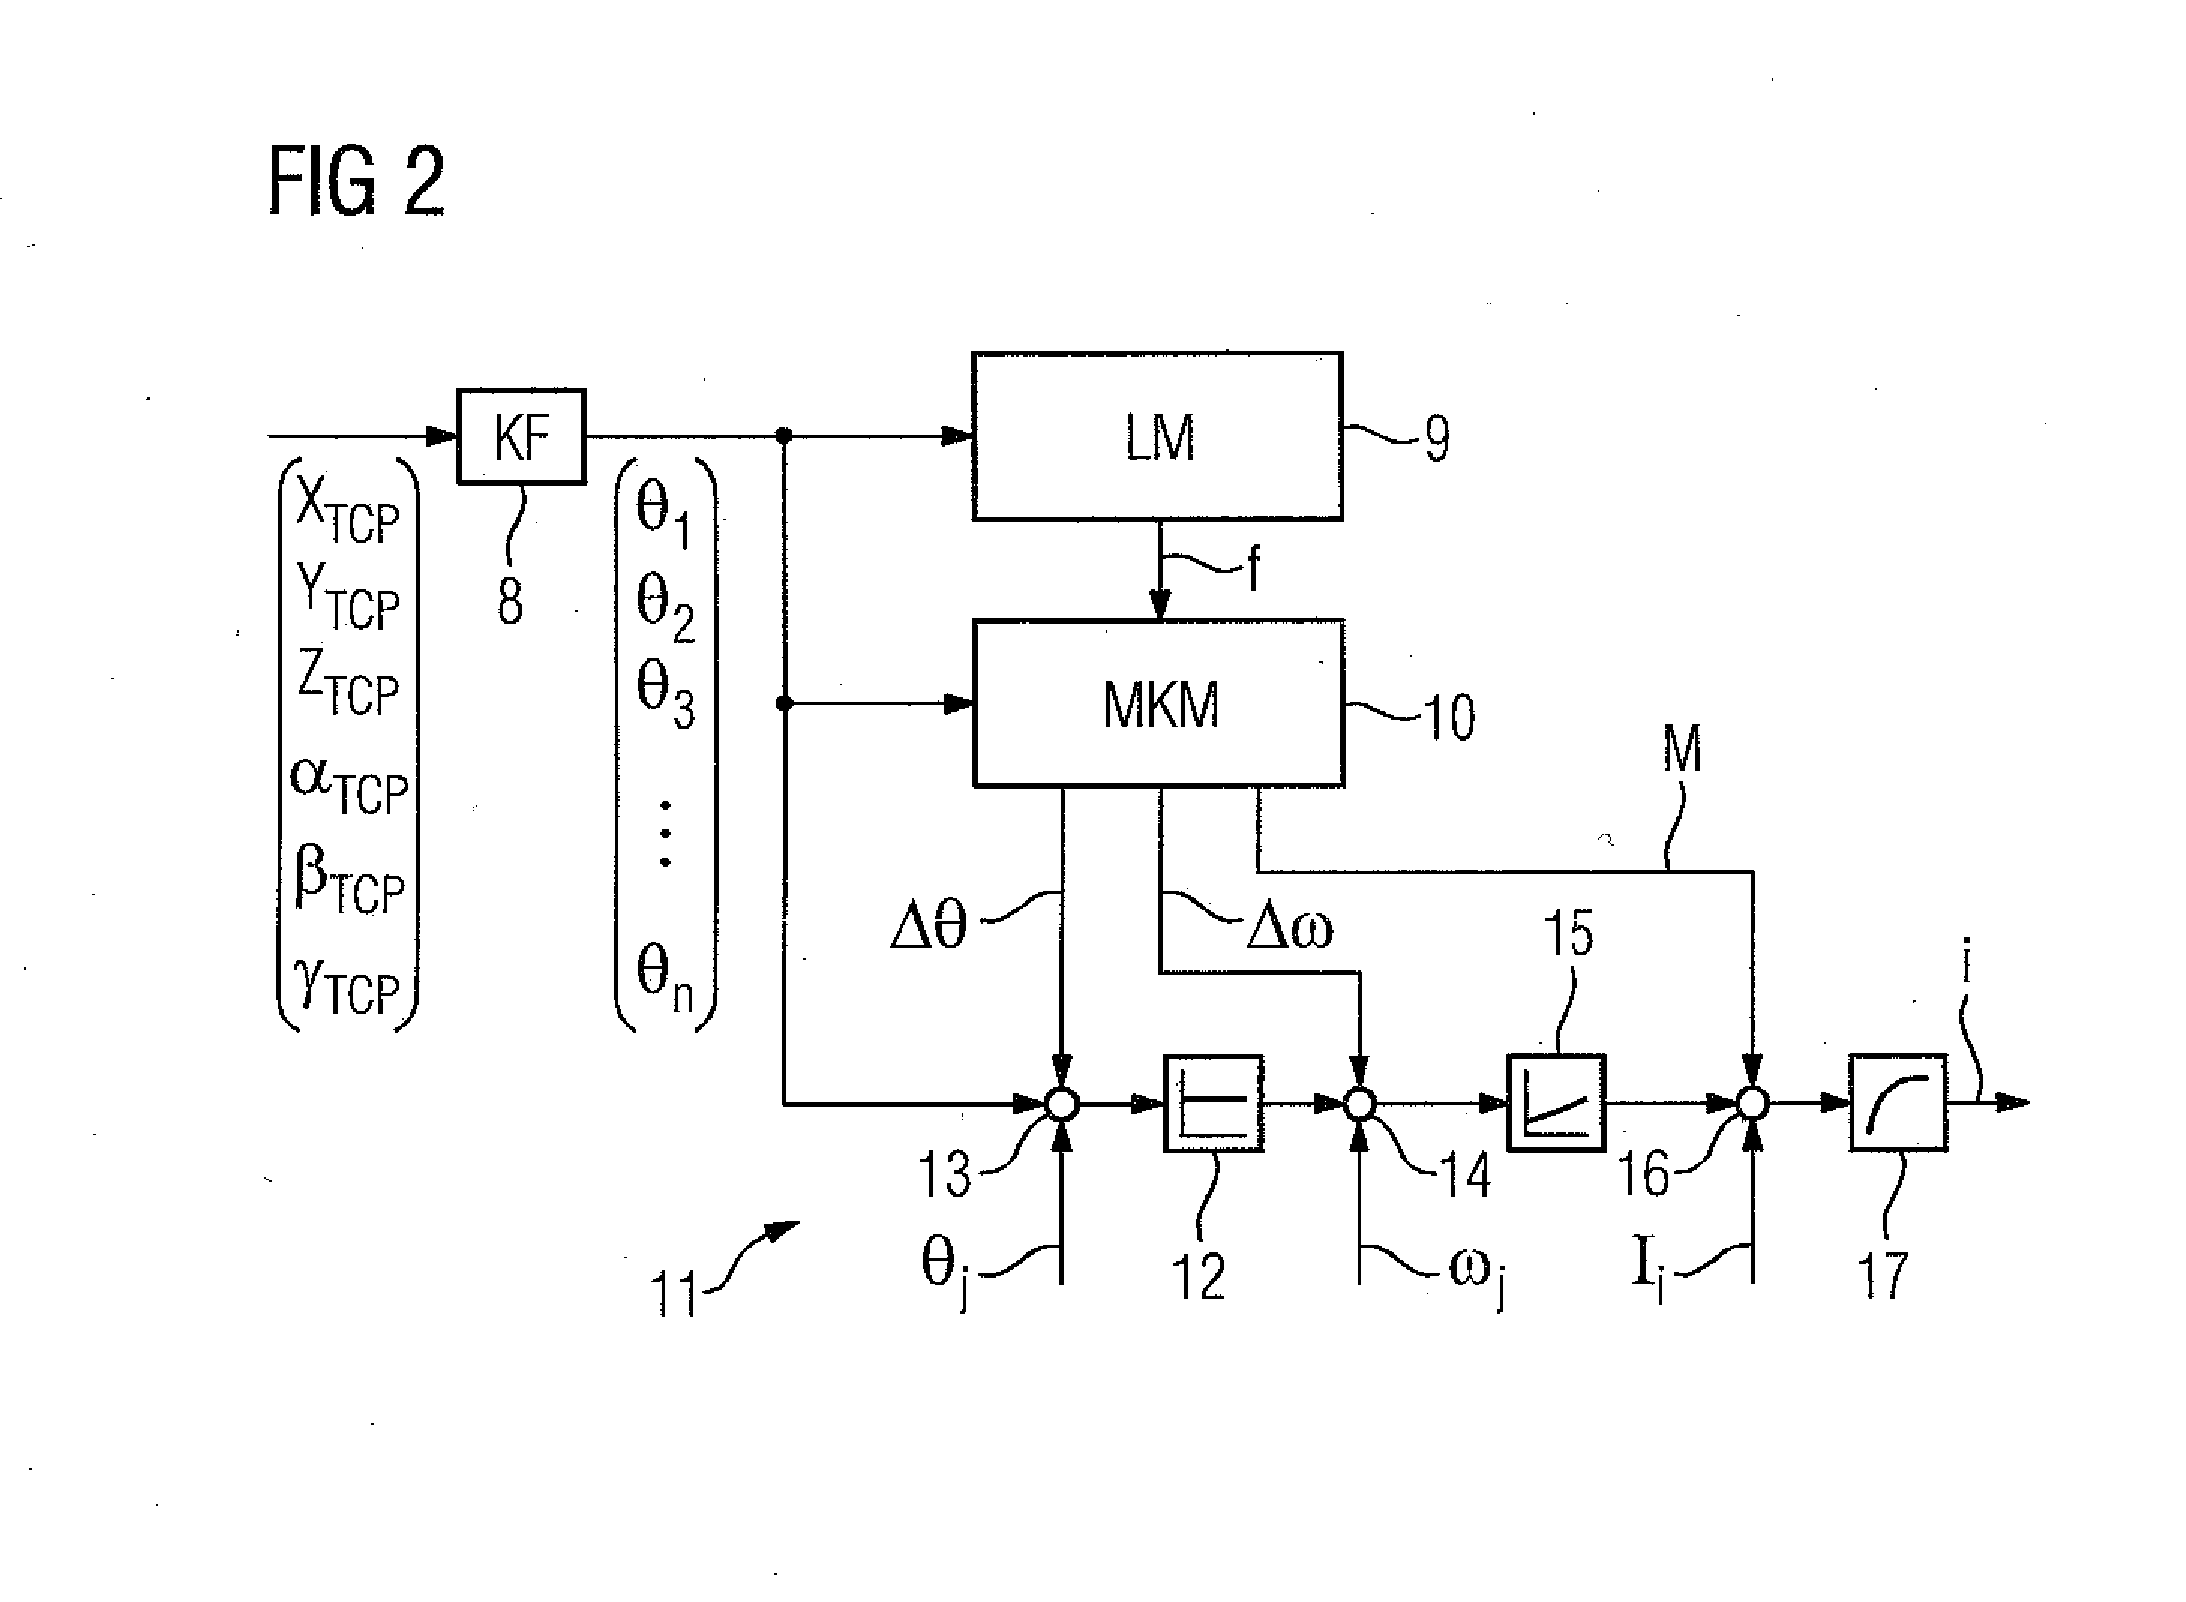 Apparatus and method for controlling and regulating a multi-element system